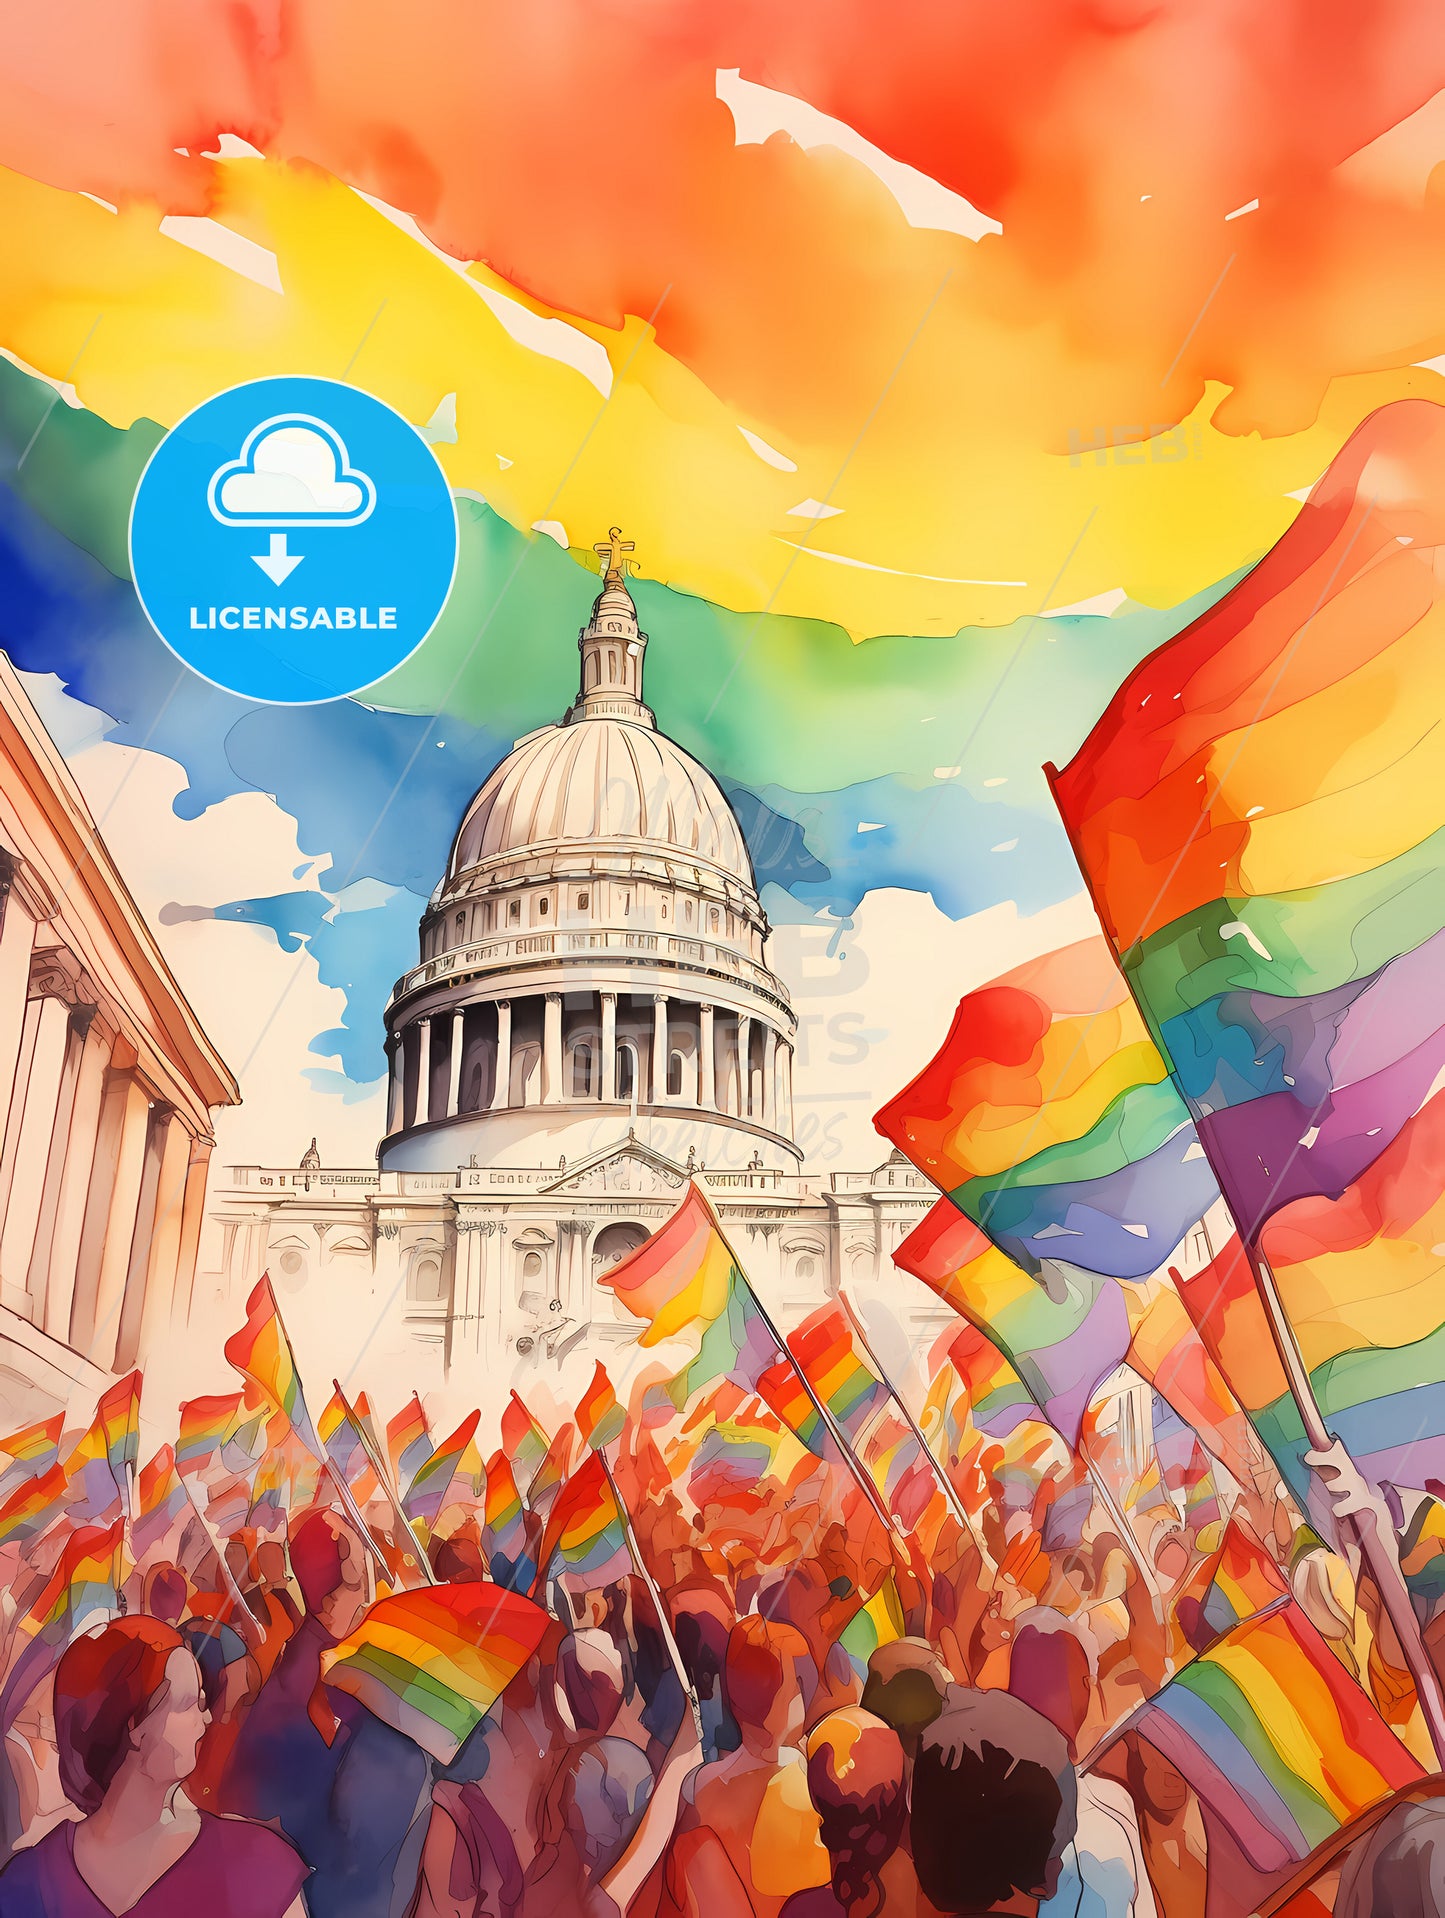 Lgbt Pride Illustration, A Group Of People Holding Rainbow Flags In Front Of A Building